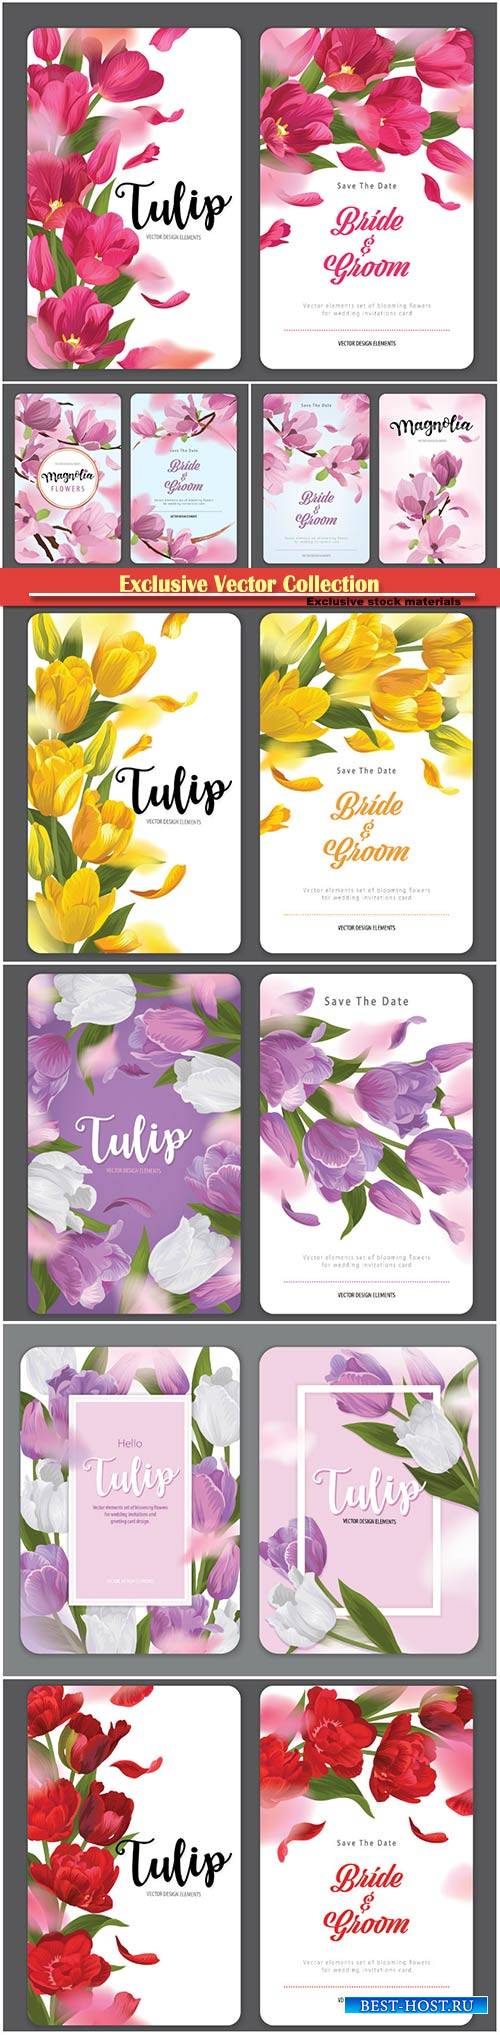 Vector elements set of flowers for wedding invitations card